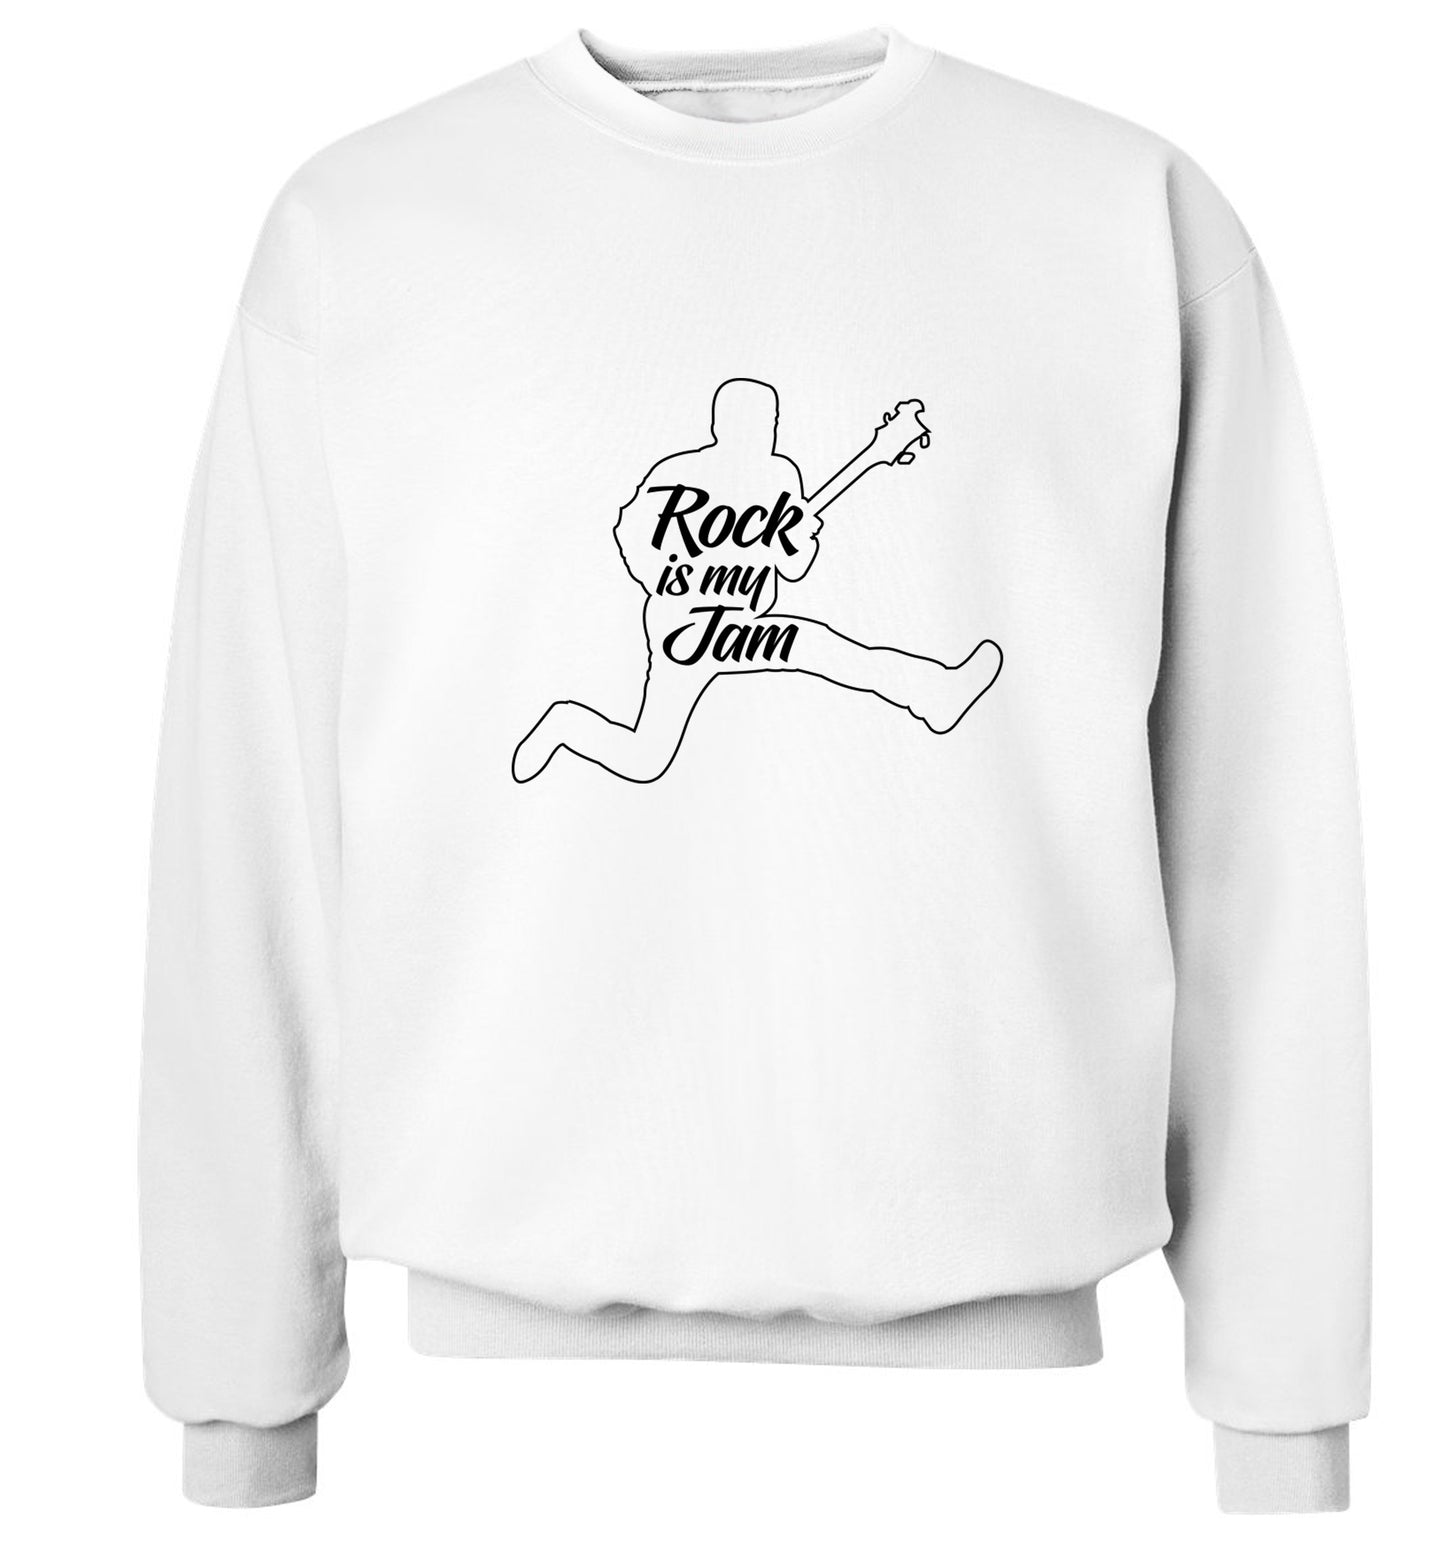 Rock is my jam Adult's unisex white Sweater 2XL